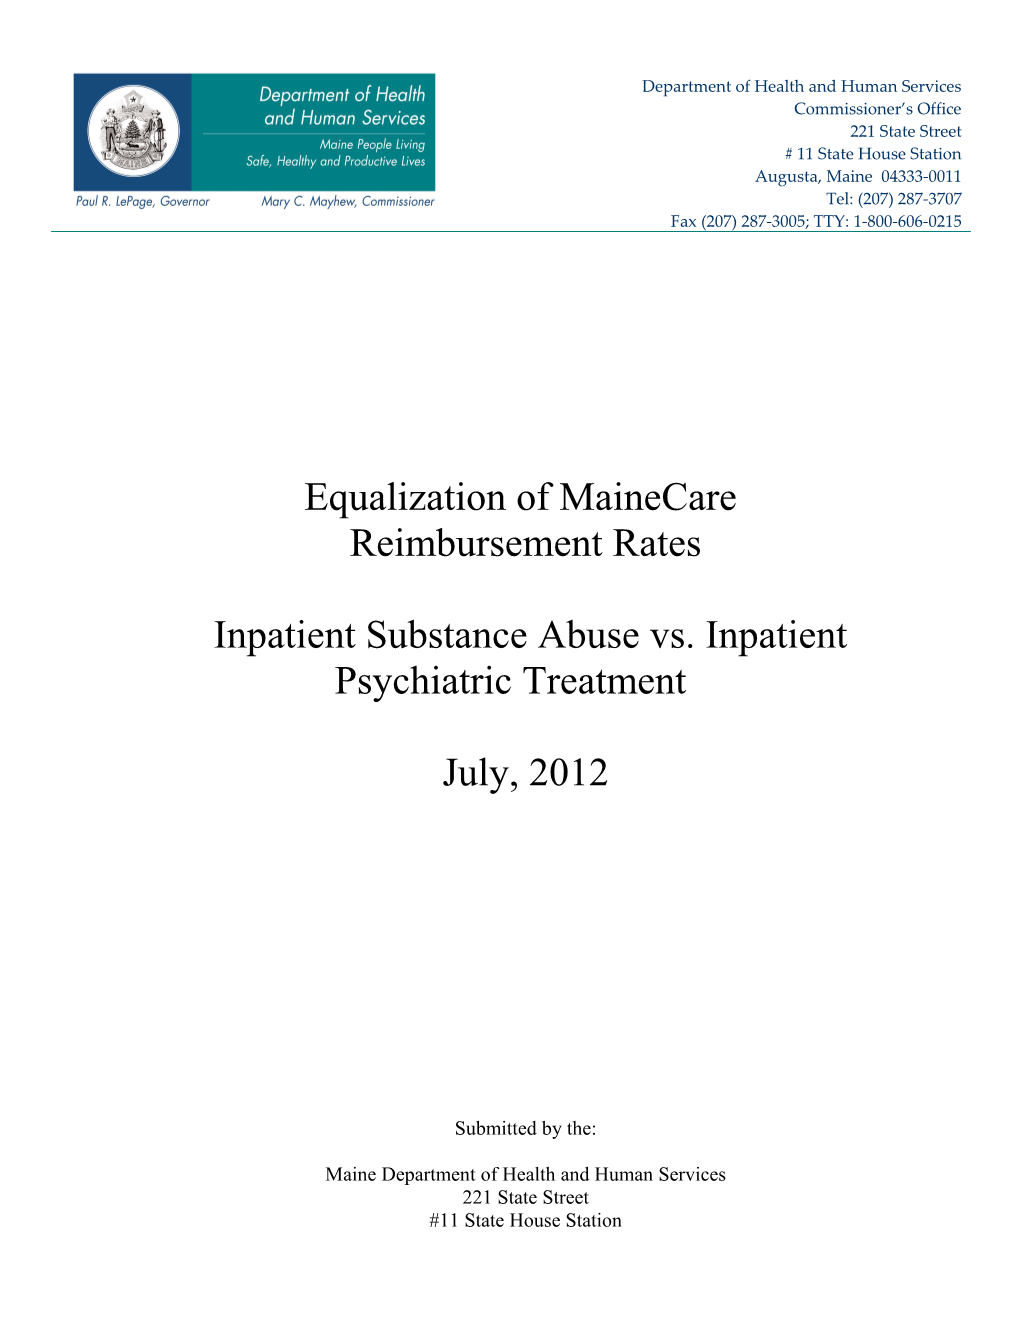 Equalization of Mainecare